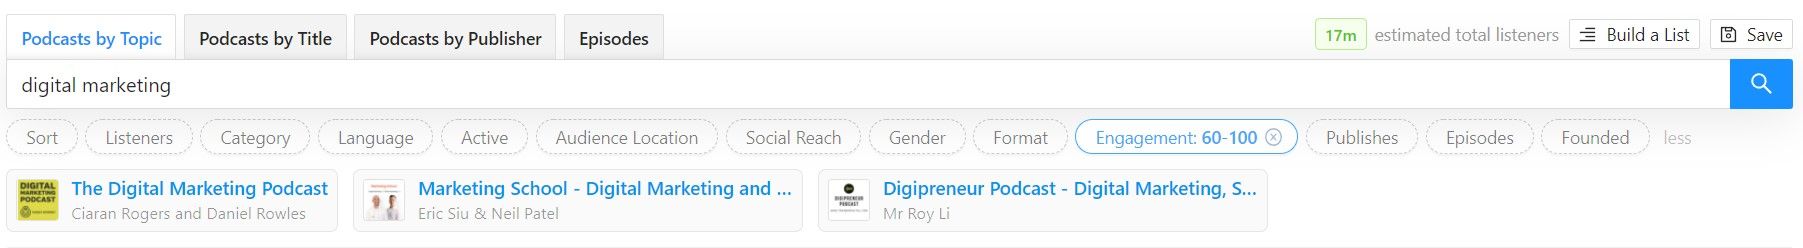 Searching for podcasts by engagement rate